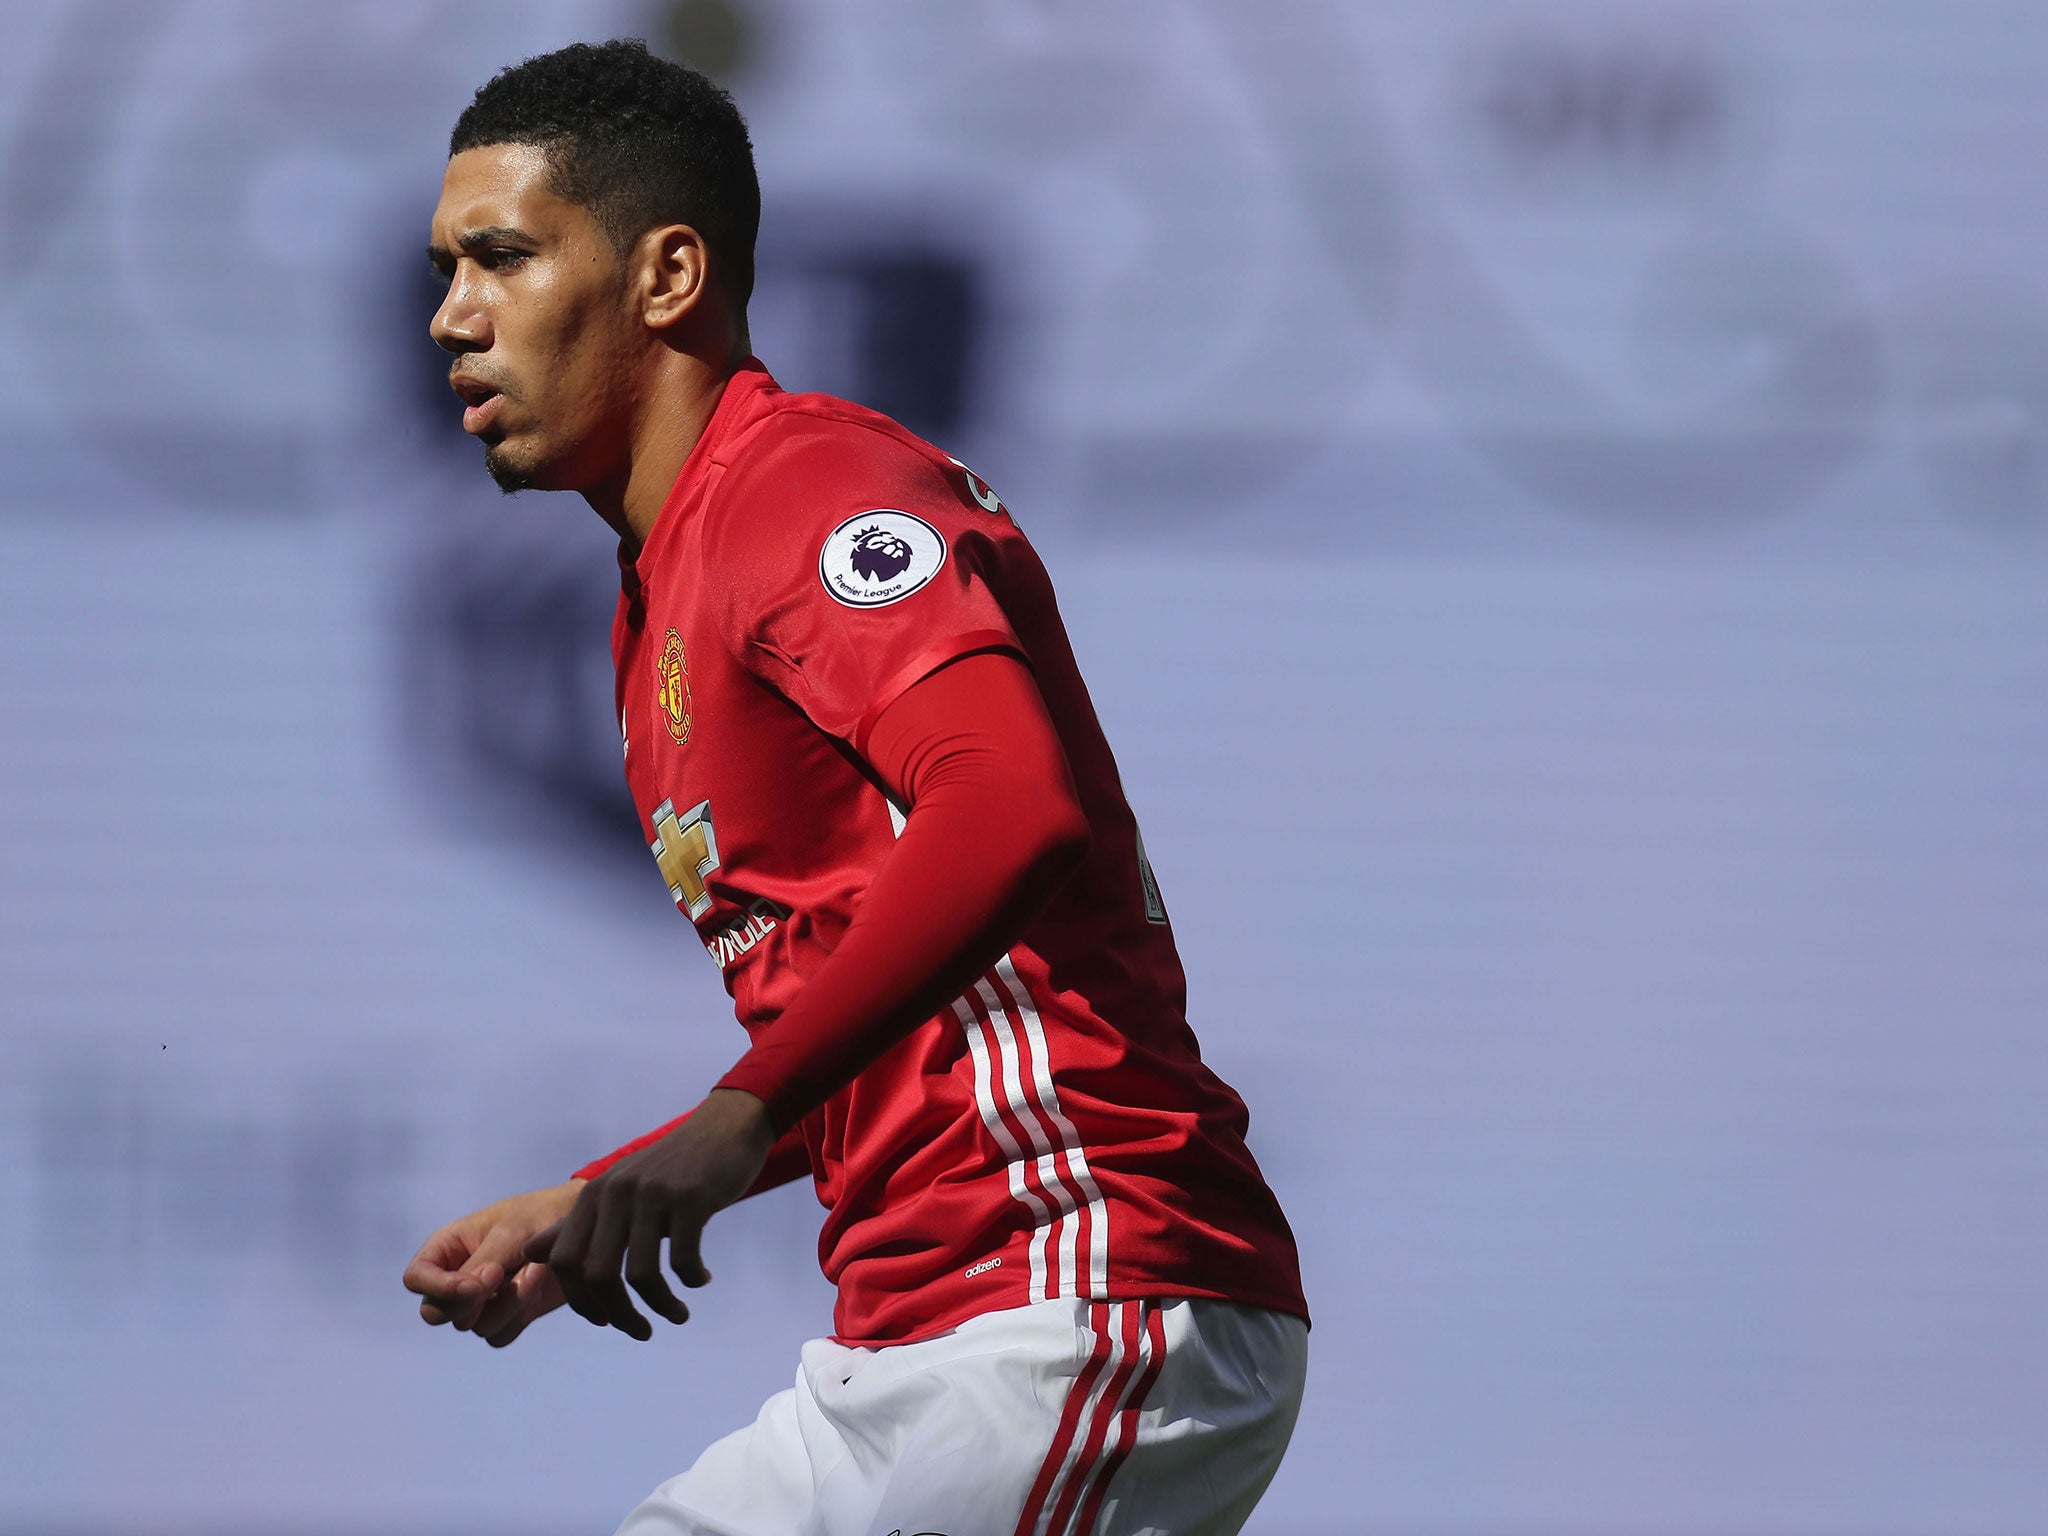 Smalling in action for United against Tottenham on Sunday